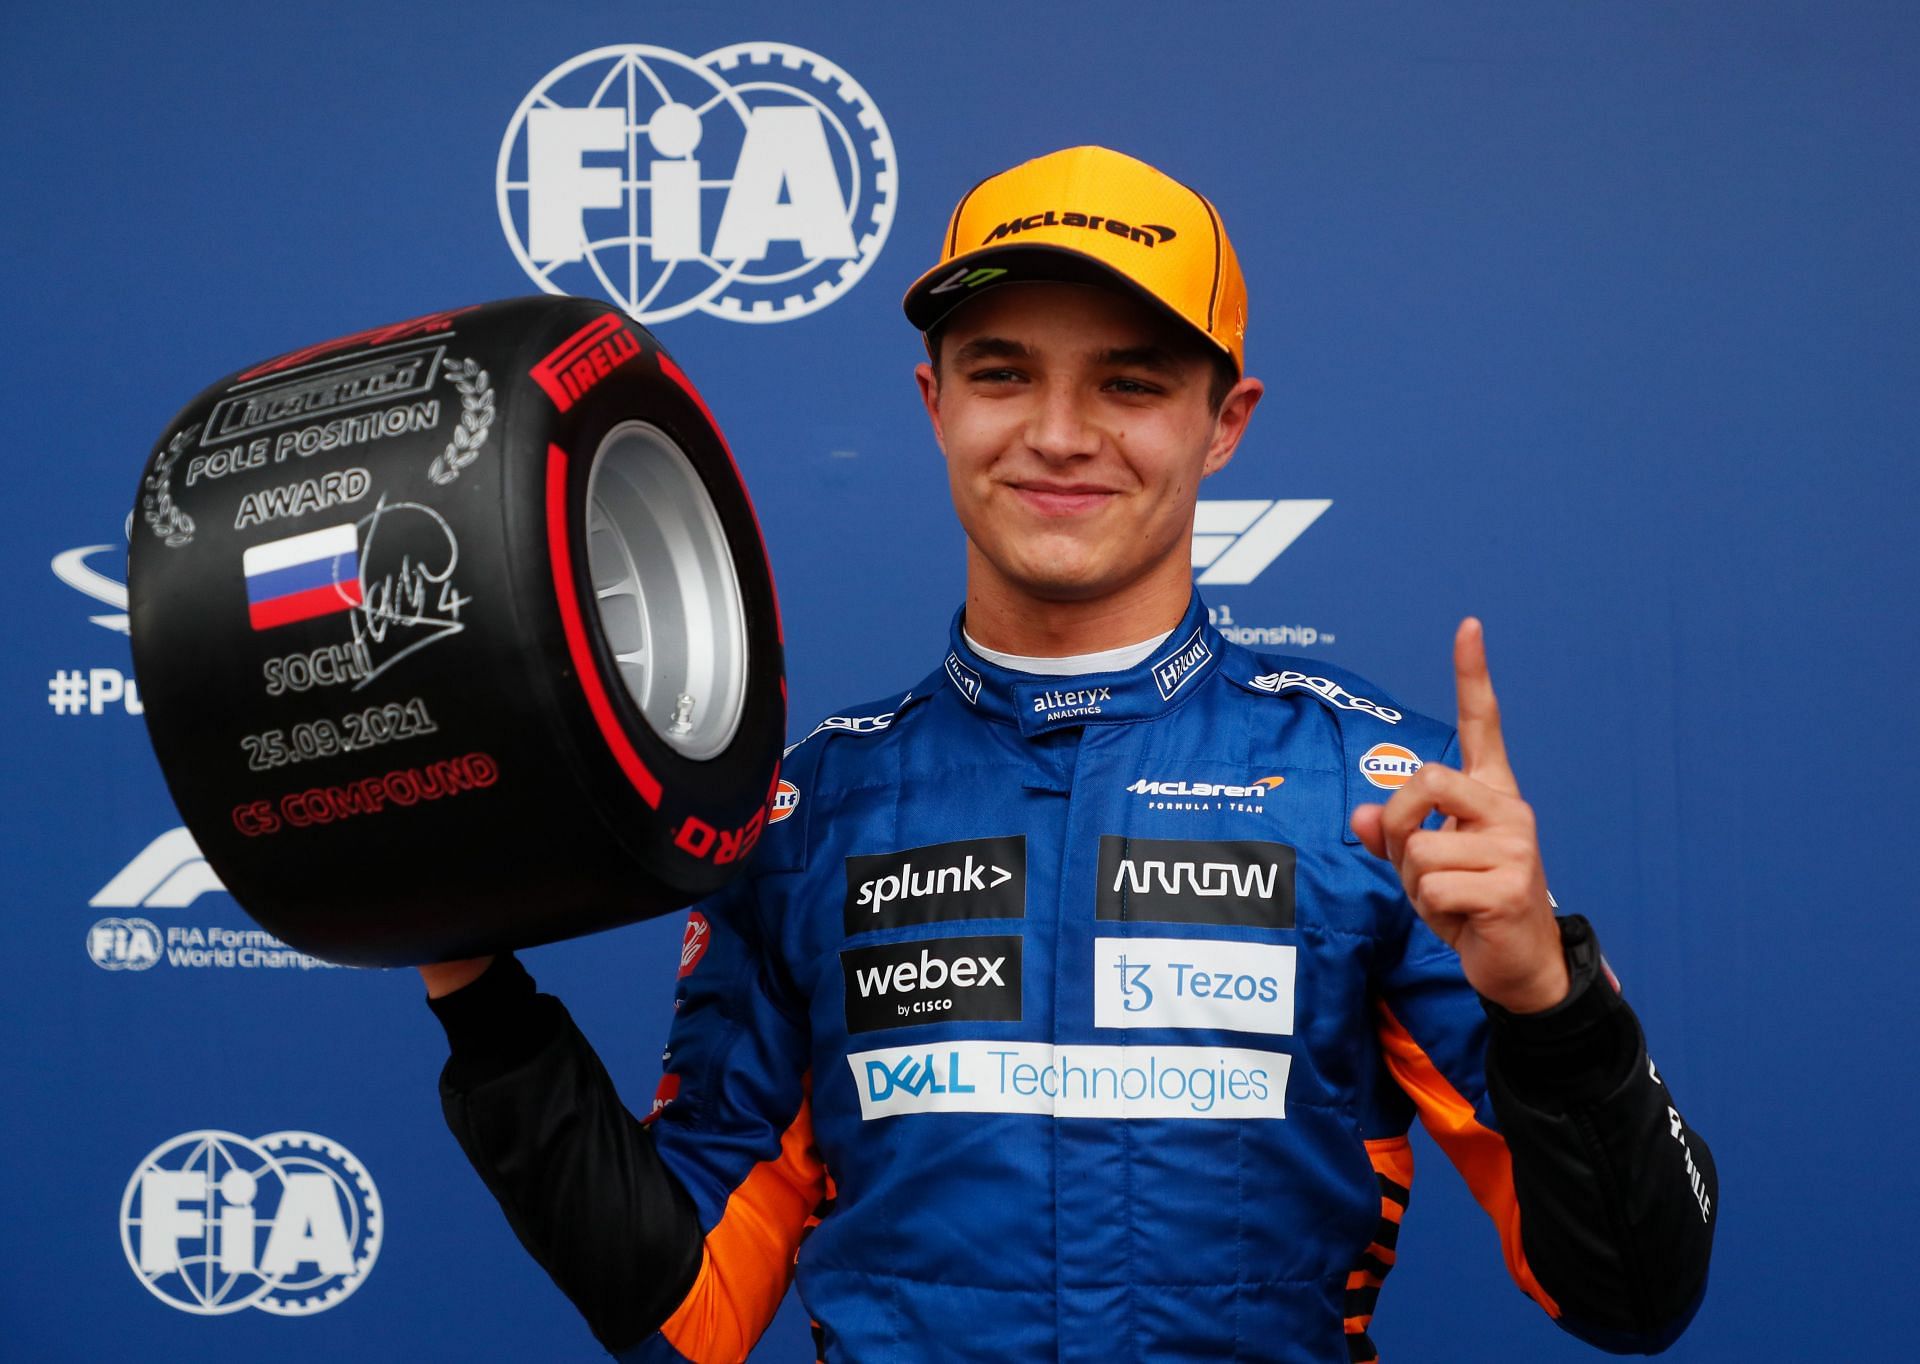 Lando Norris took his first career pole position at the 2021 Russian Grand Prix